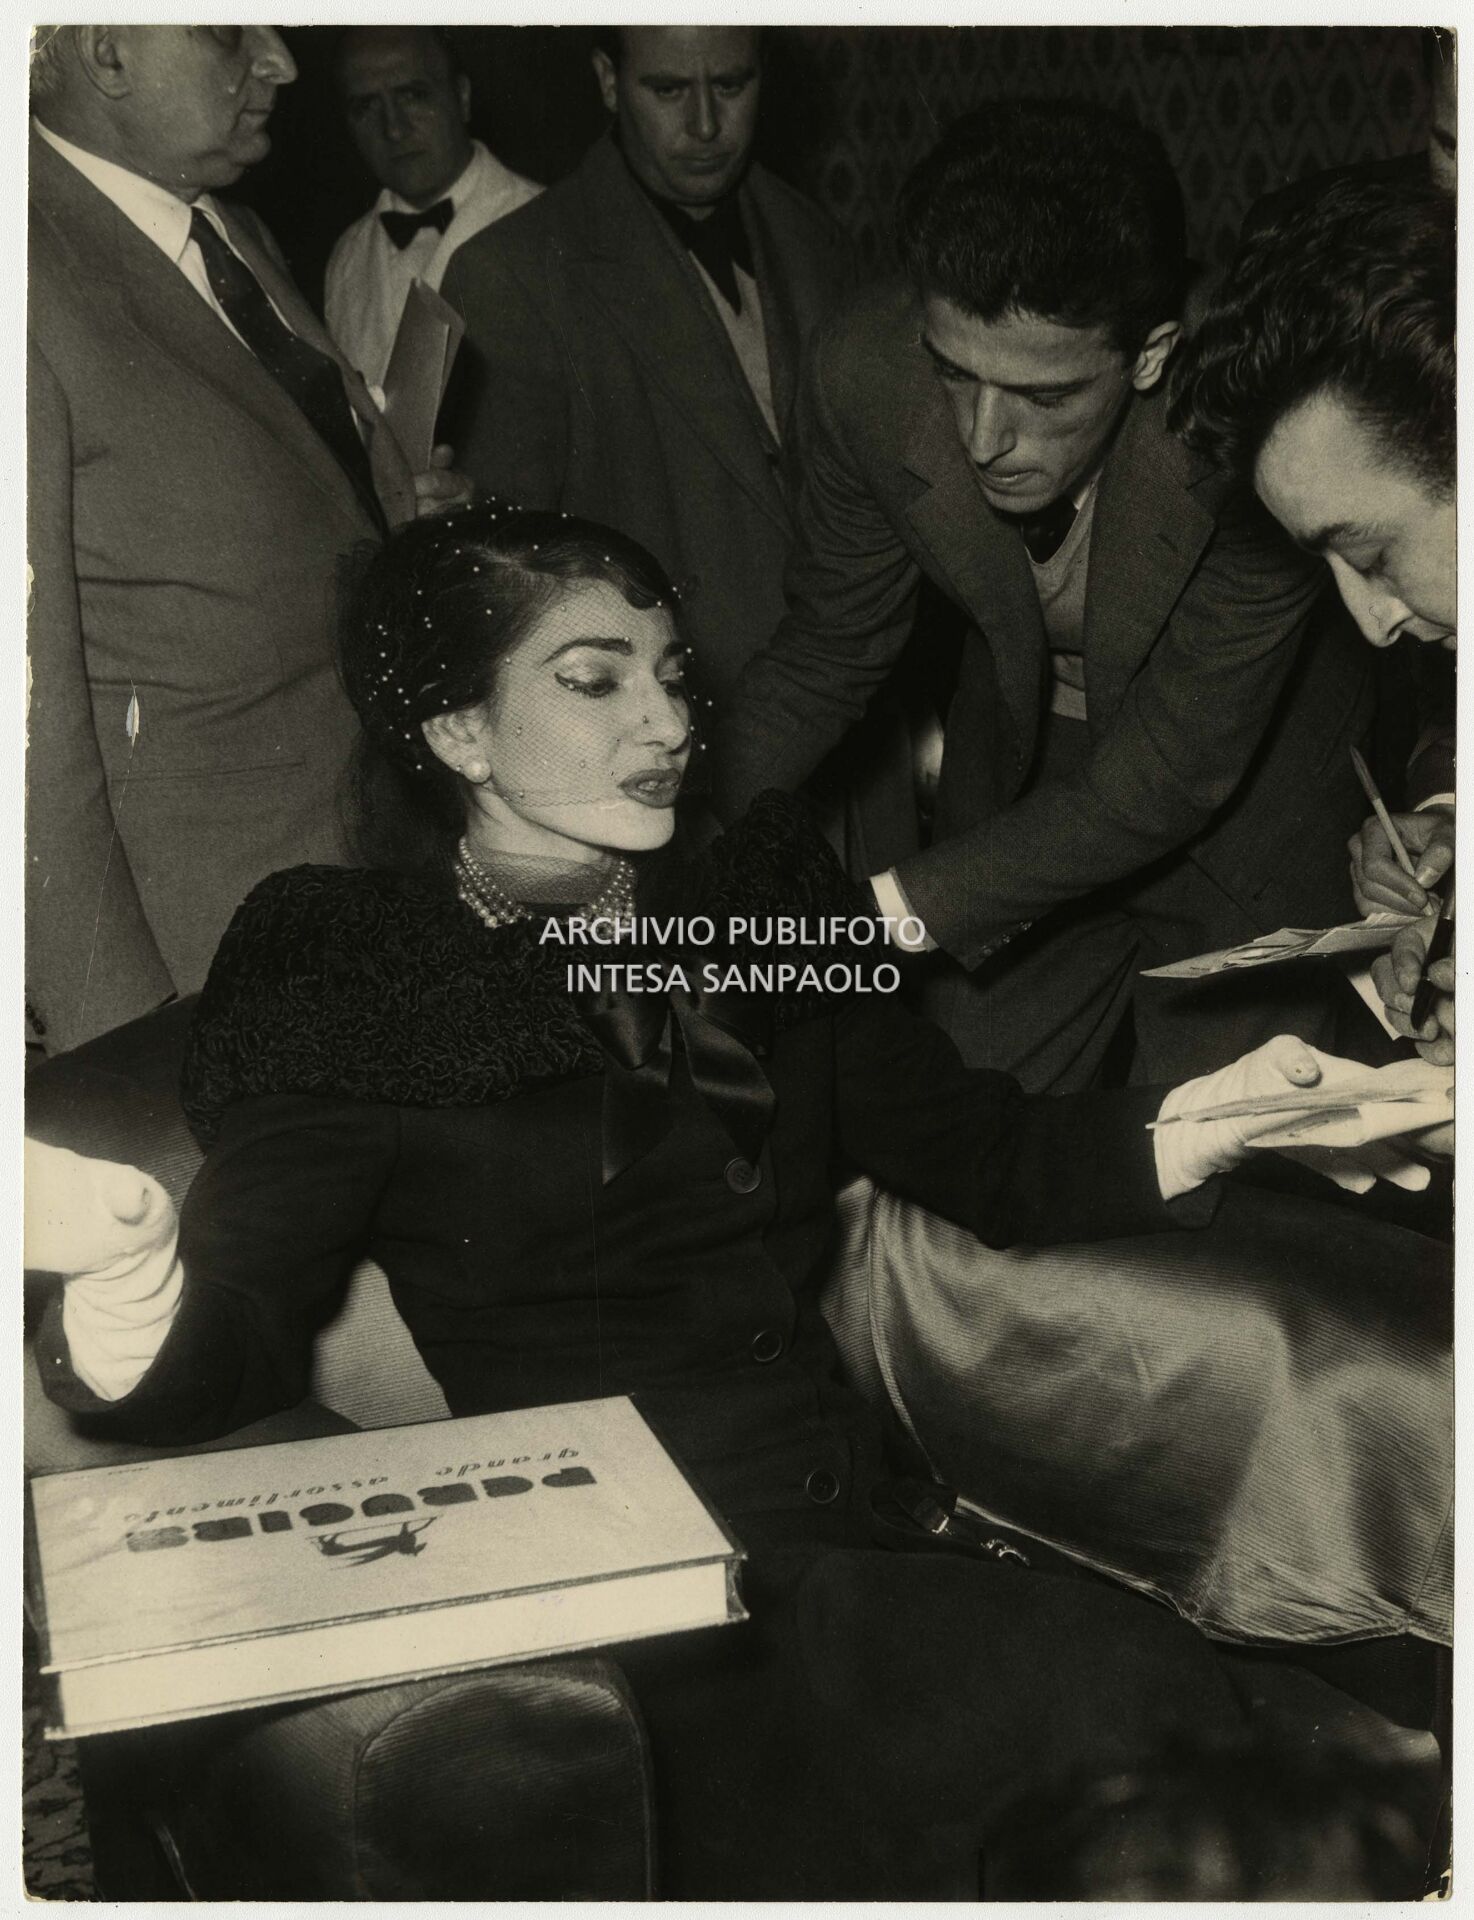 Press conference a few days after the opening night of the season at the Teatro dell'Opera in Rome; Maria Callas, who was performing Bellini's Norma, retired to her dressing room at the end of the first act due to severe hoarseness and did not return to the stage.